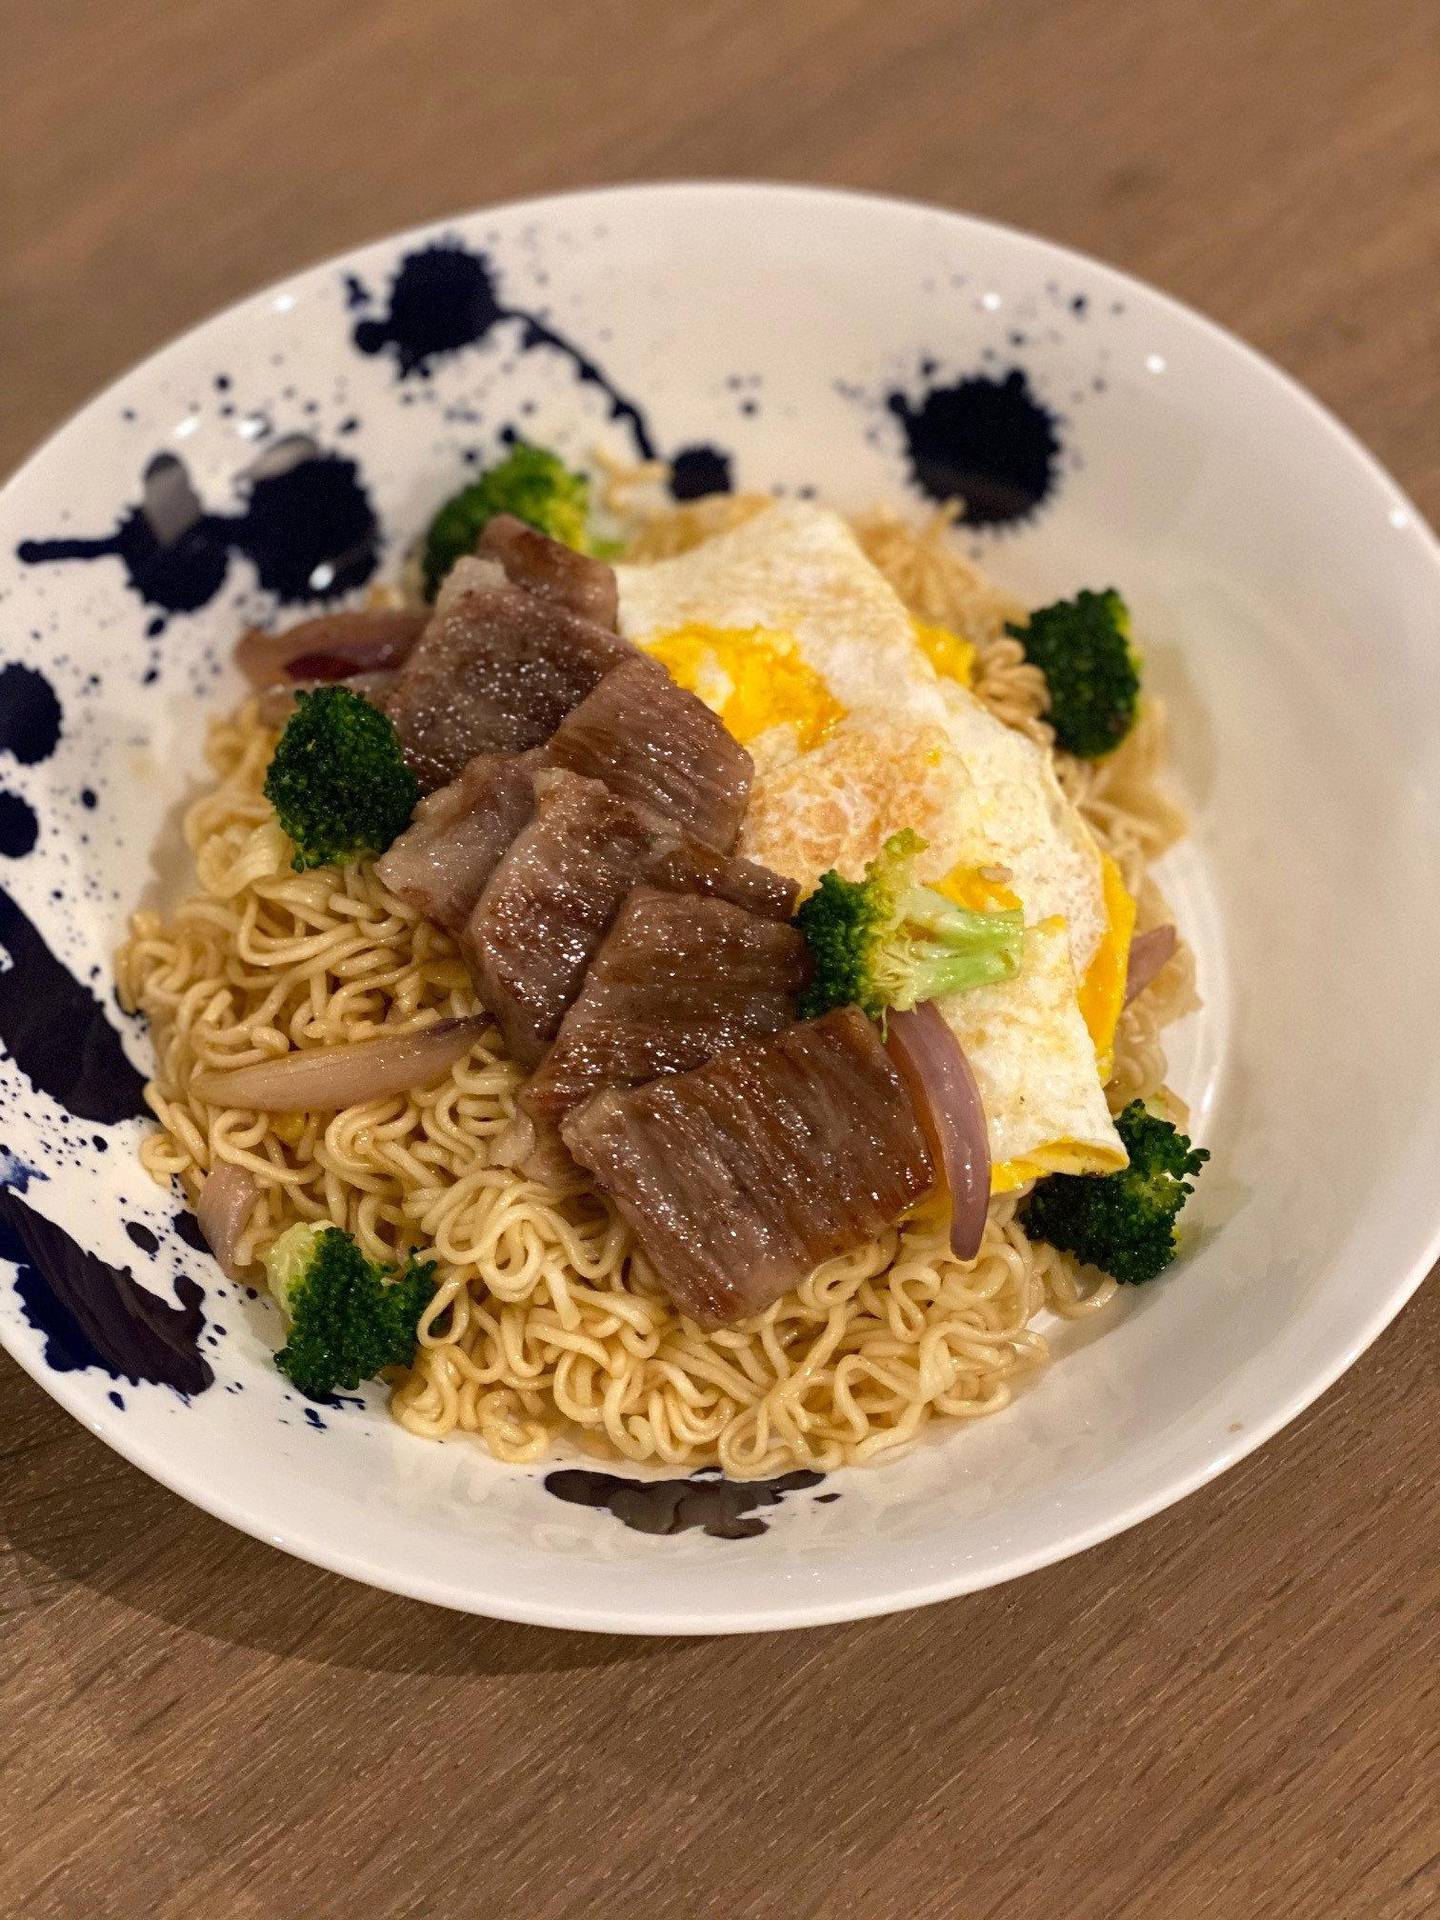 A Wagyu noodle dish made with Maggi. Courtesy of Reif Othman